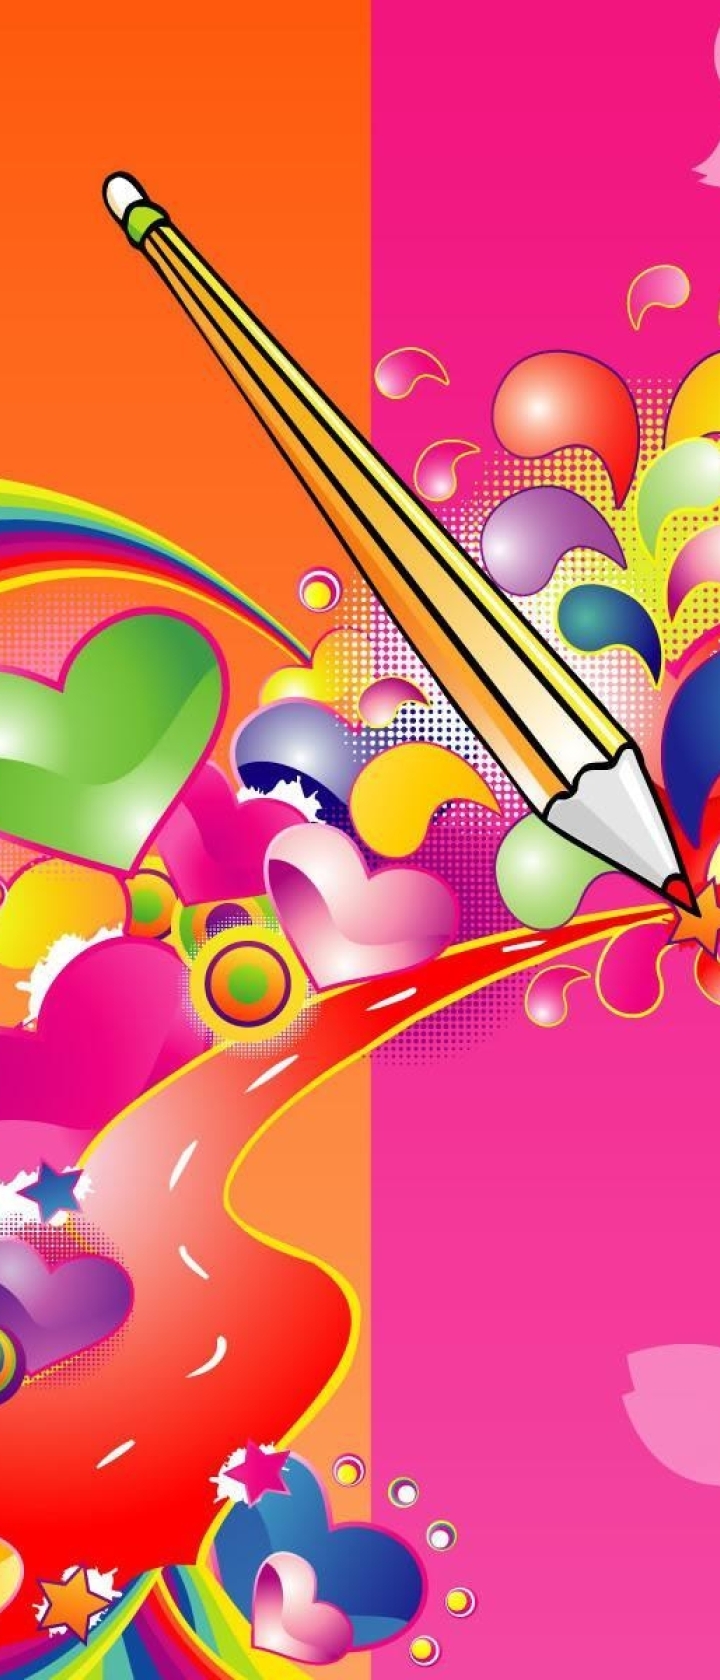 720x1680 pencil, drawing, colorful 720x1680 Resolution Wallpaper, HD